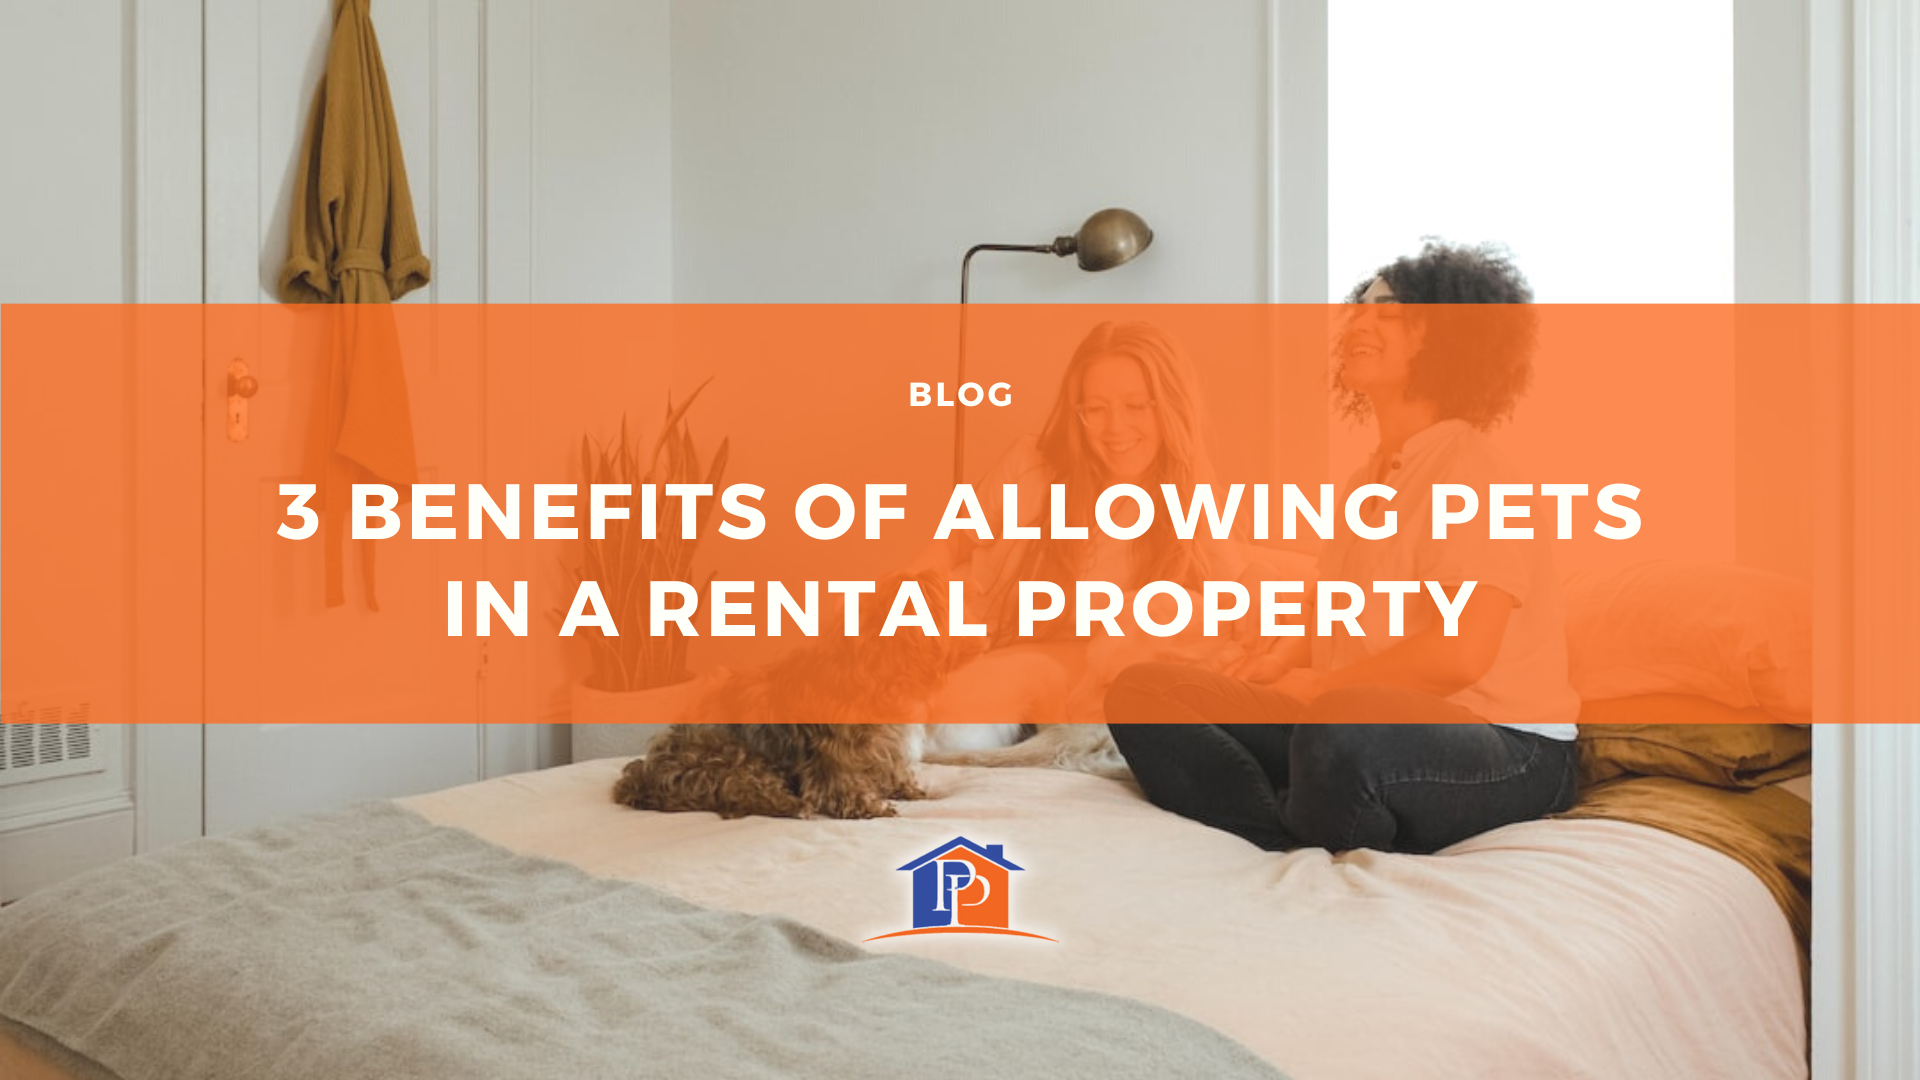 3 Benefits of Allowing Pets in a Rental Property